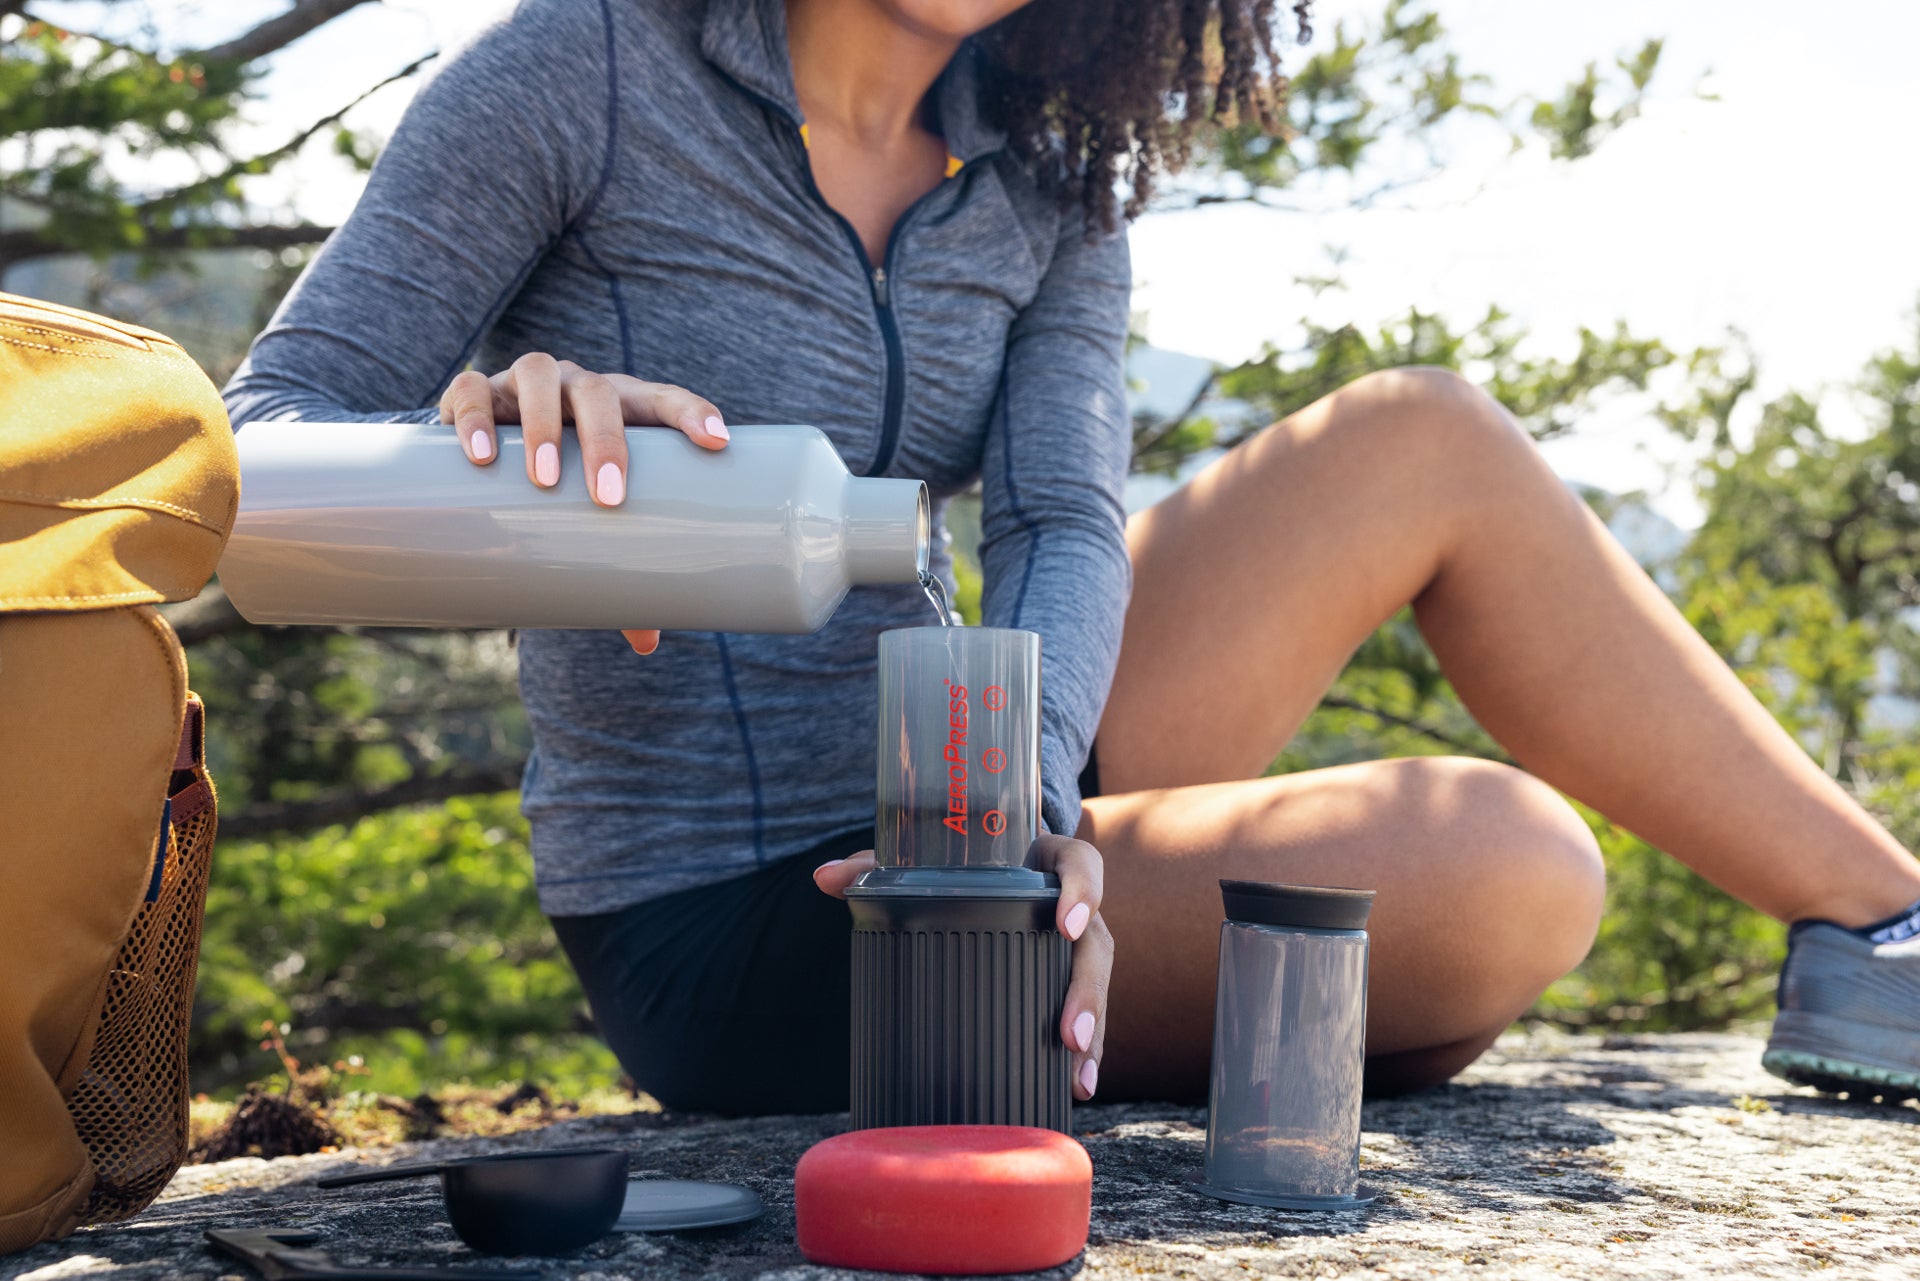 Woman pours hot water into AeroPress Go while backpacking